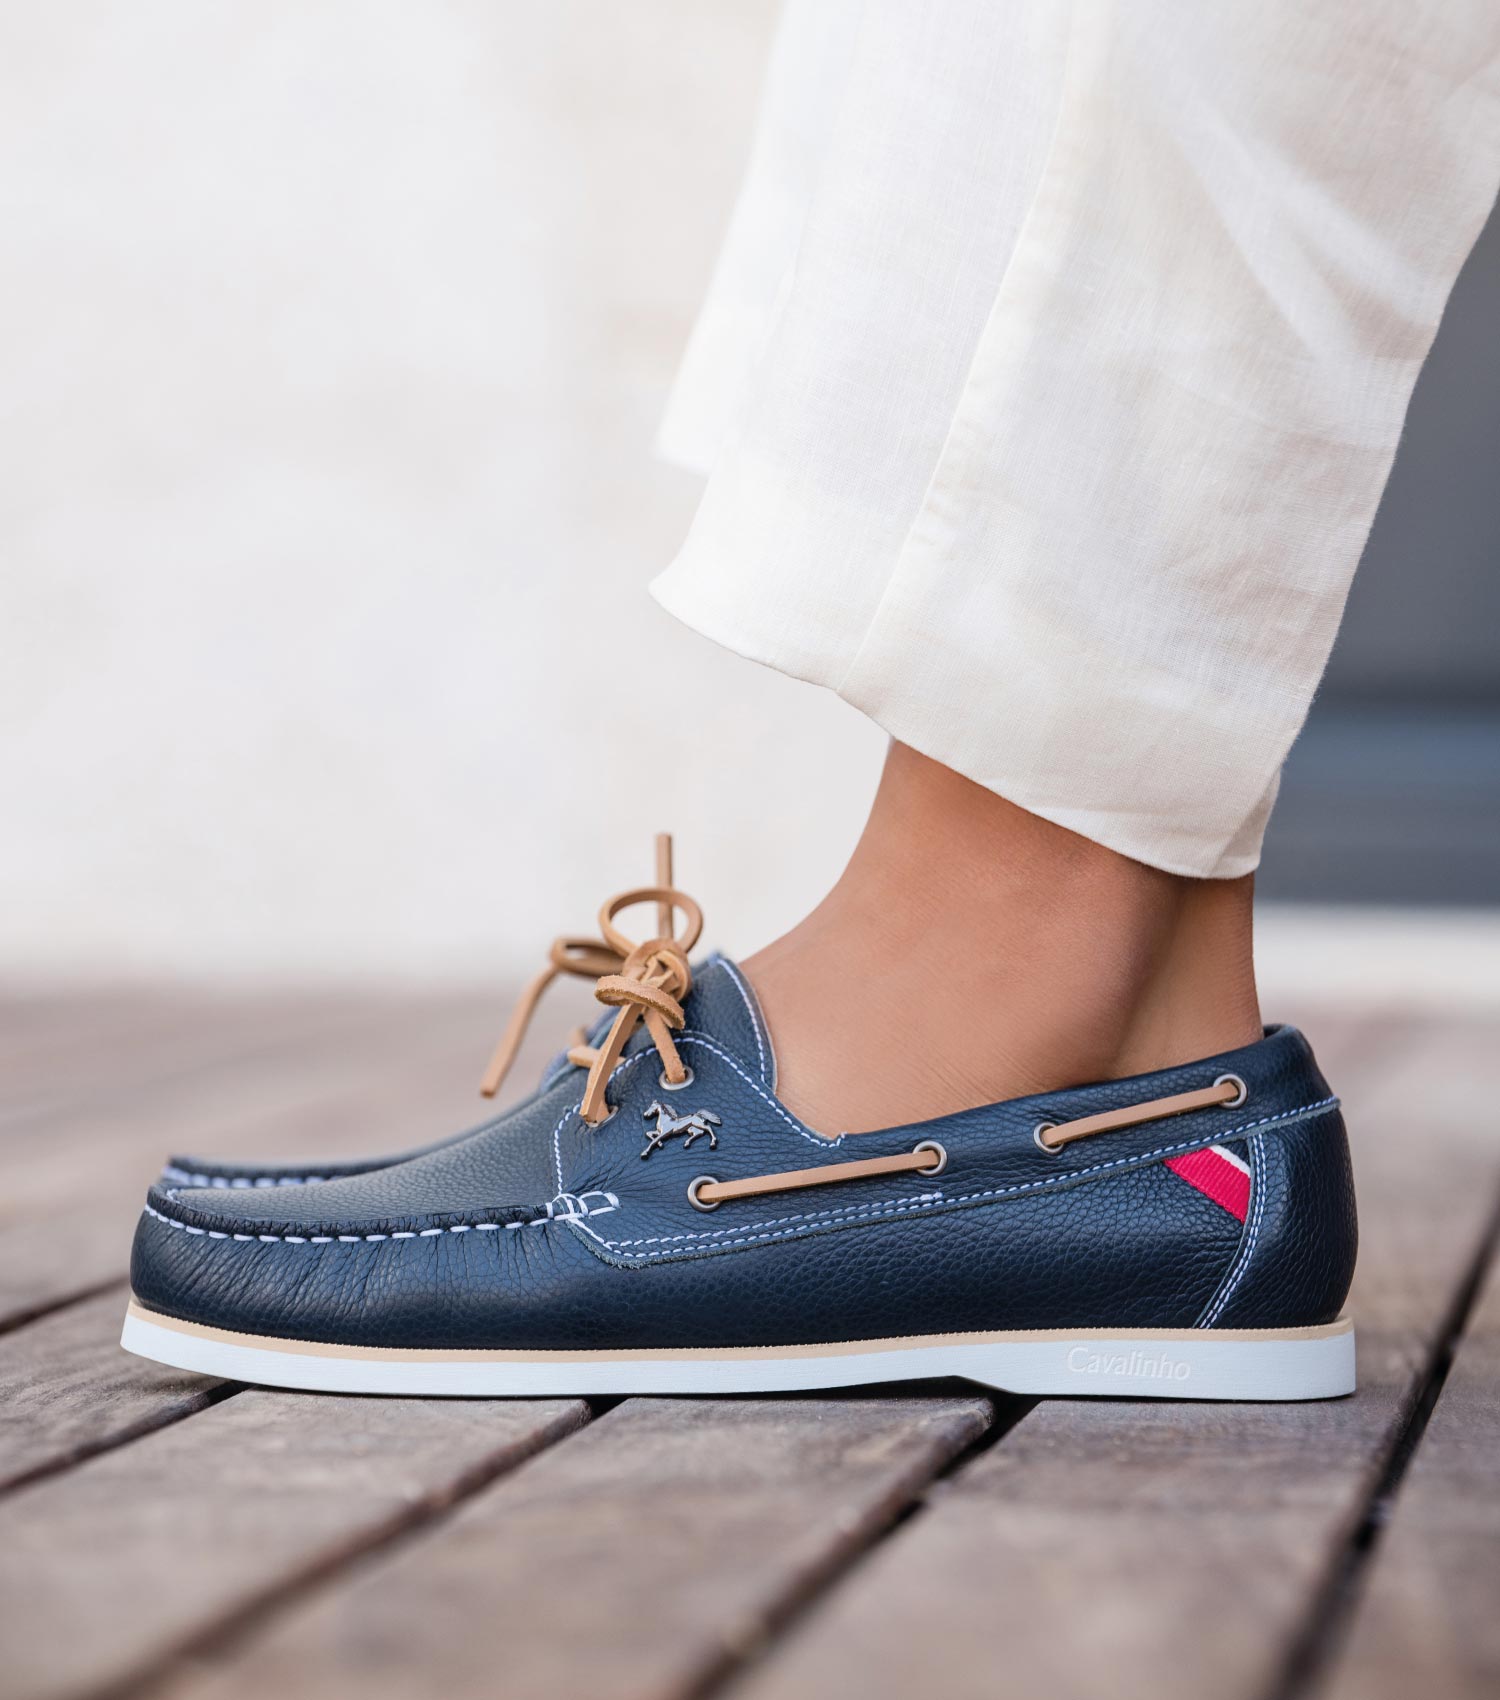 Cavalinho The Sailor Boat Shoes - Navy - 48020002.03LifeStyle